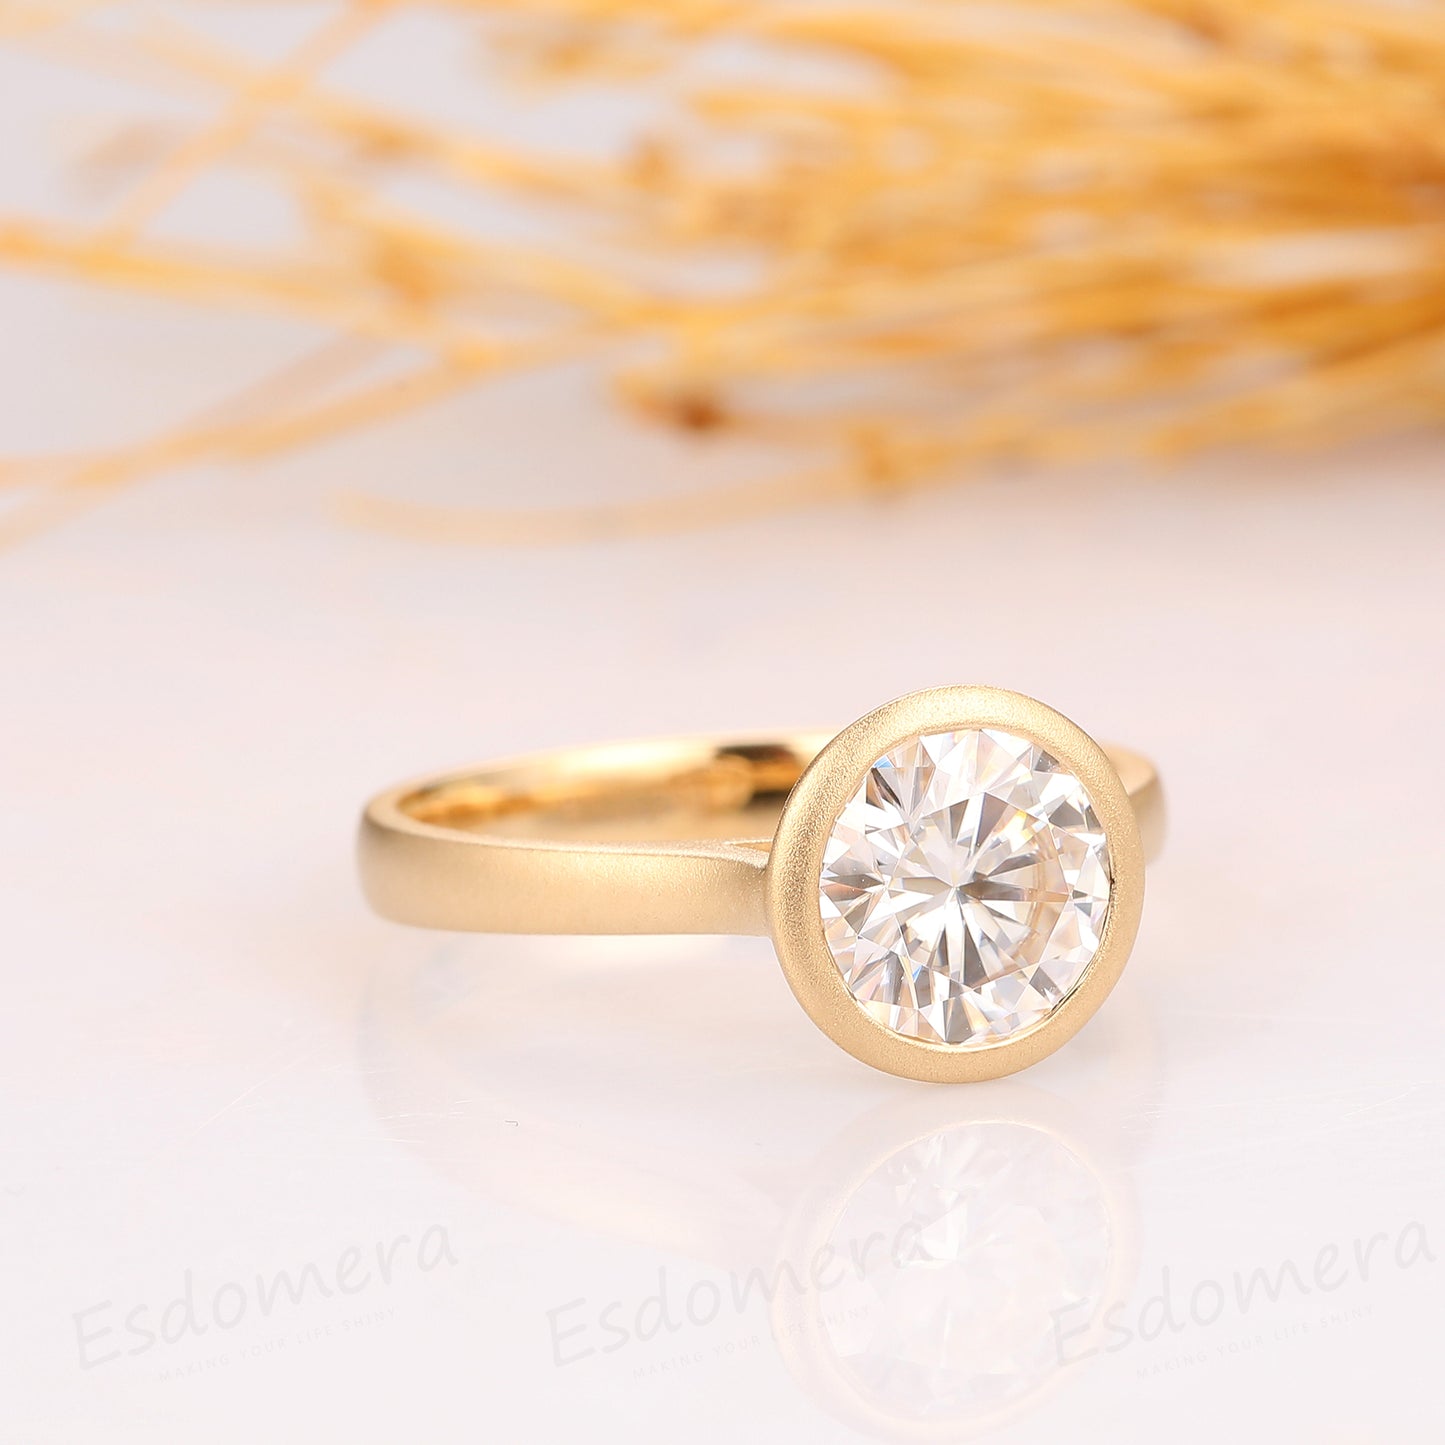 Round Cut 1.5ct Moissanite Ring, Solitaire Bezel Set Ring, 14k Yellow Gold Engagement Ring